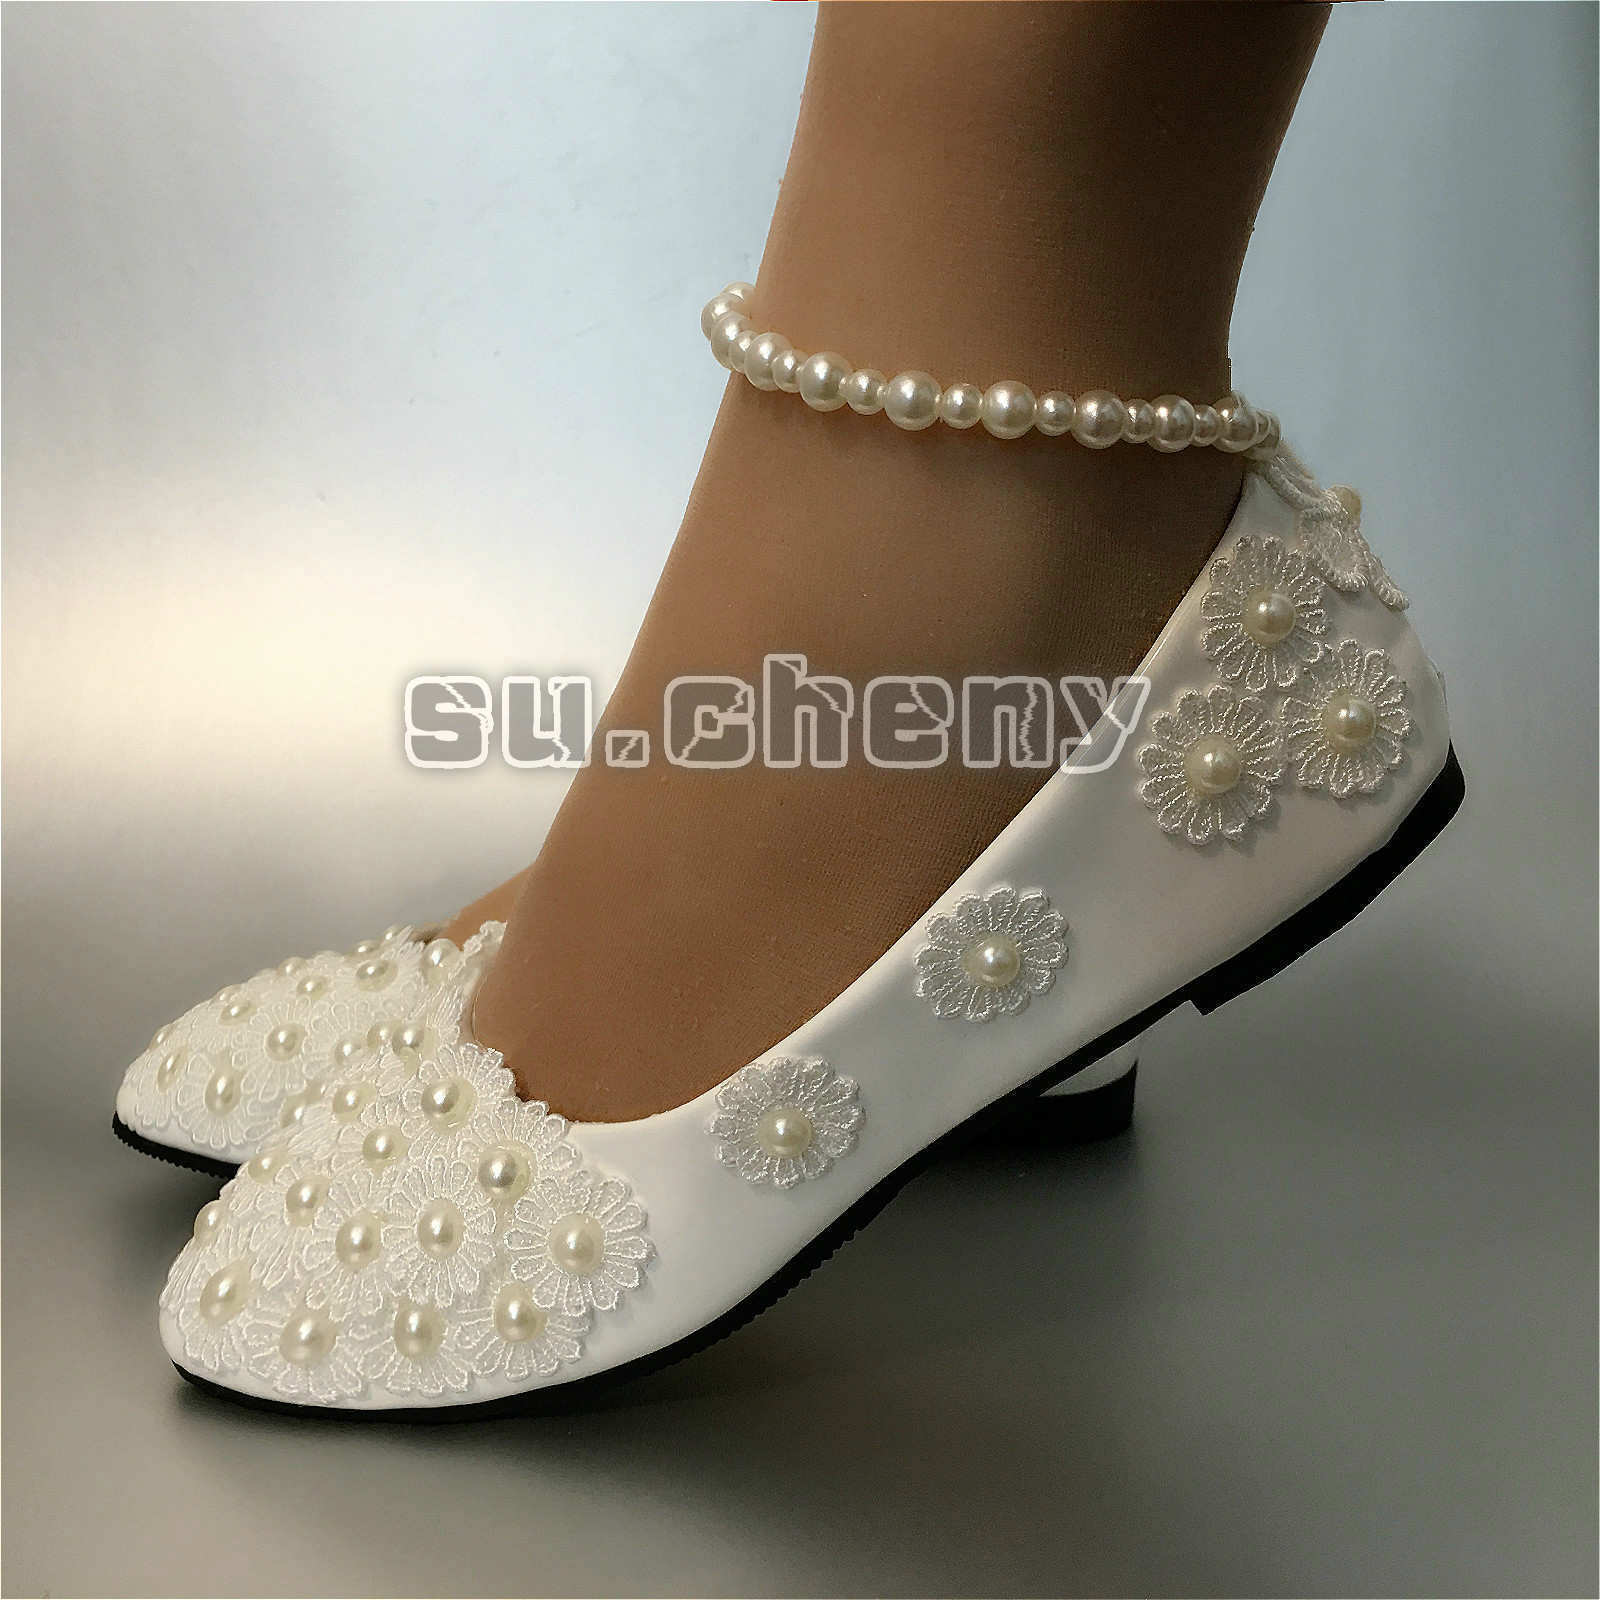 Su.cheny White Lace Pearls Ankle Trap Flats Low High Heels Wedding Bridal Shoes